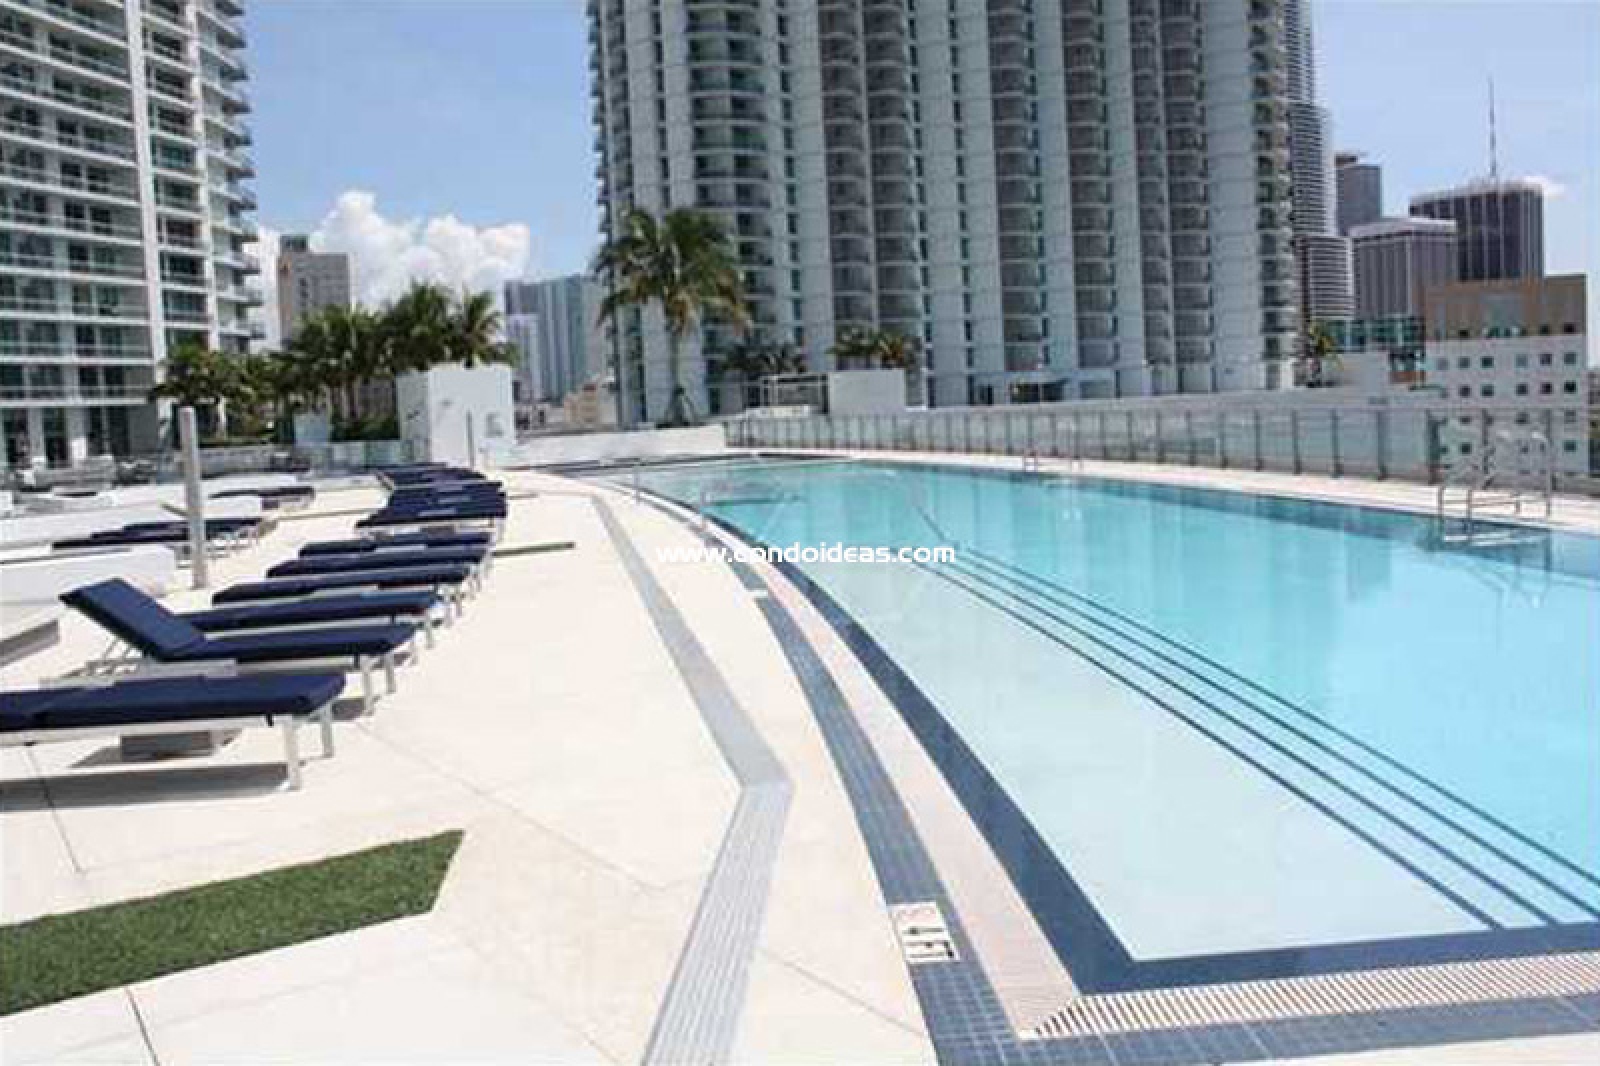 Mint At Riverfront Condo Downtown Miami Luxury Real Estate